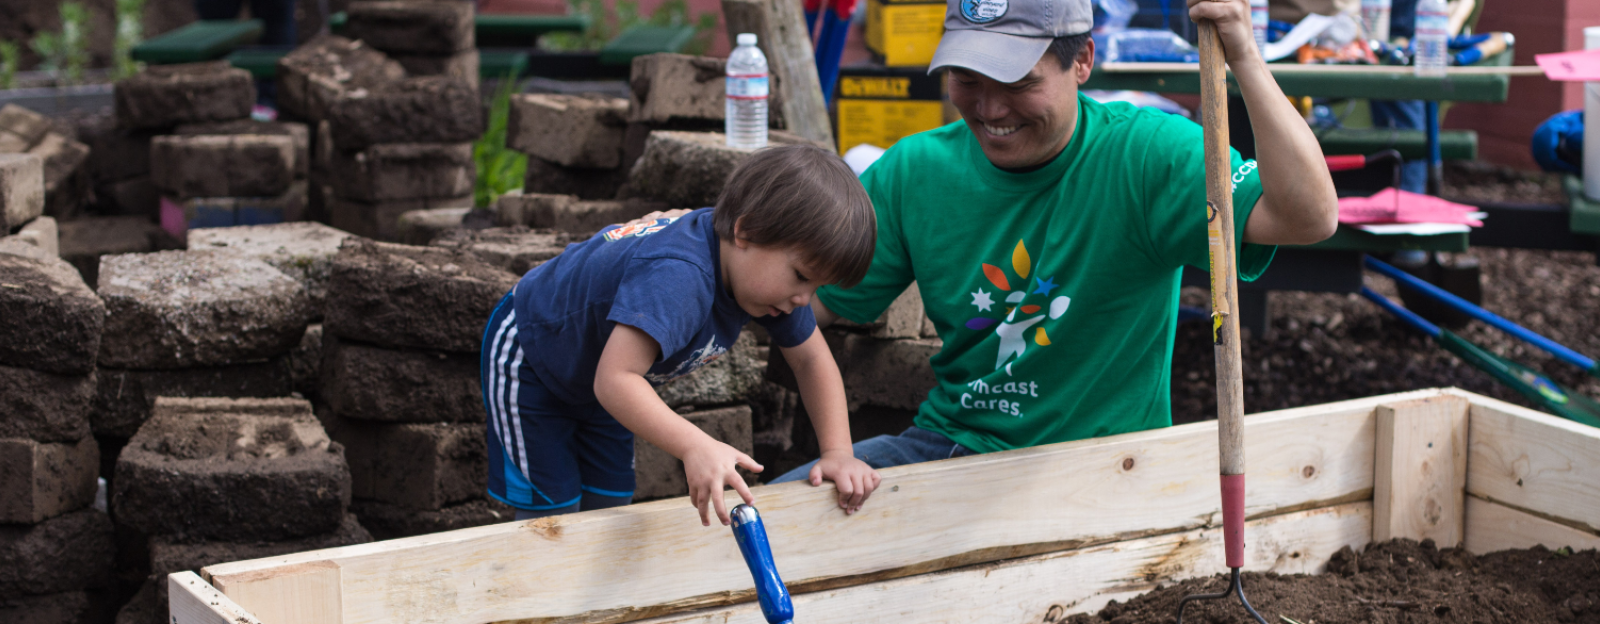 A man in a green shirt helps a child work in a garden bed. 